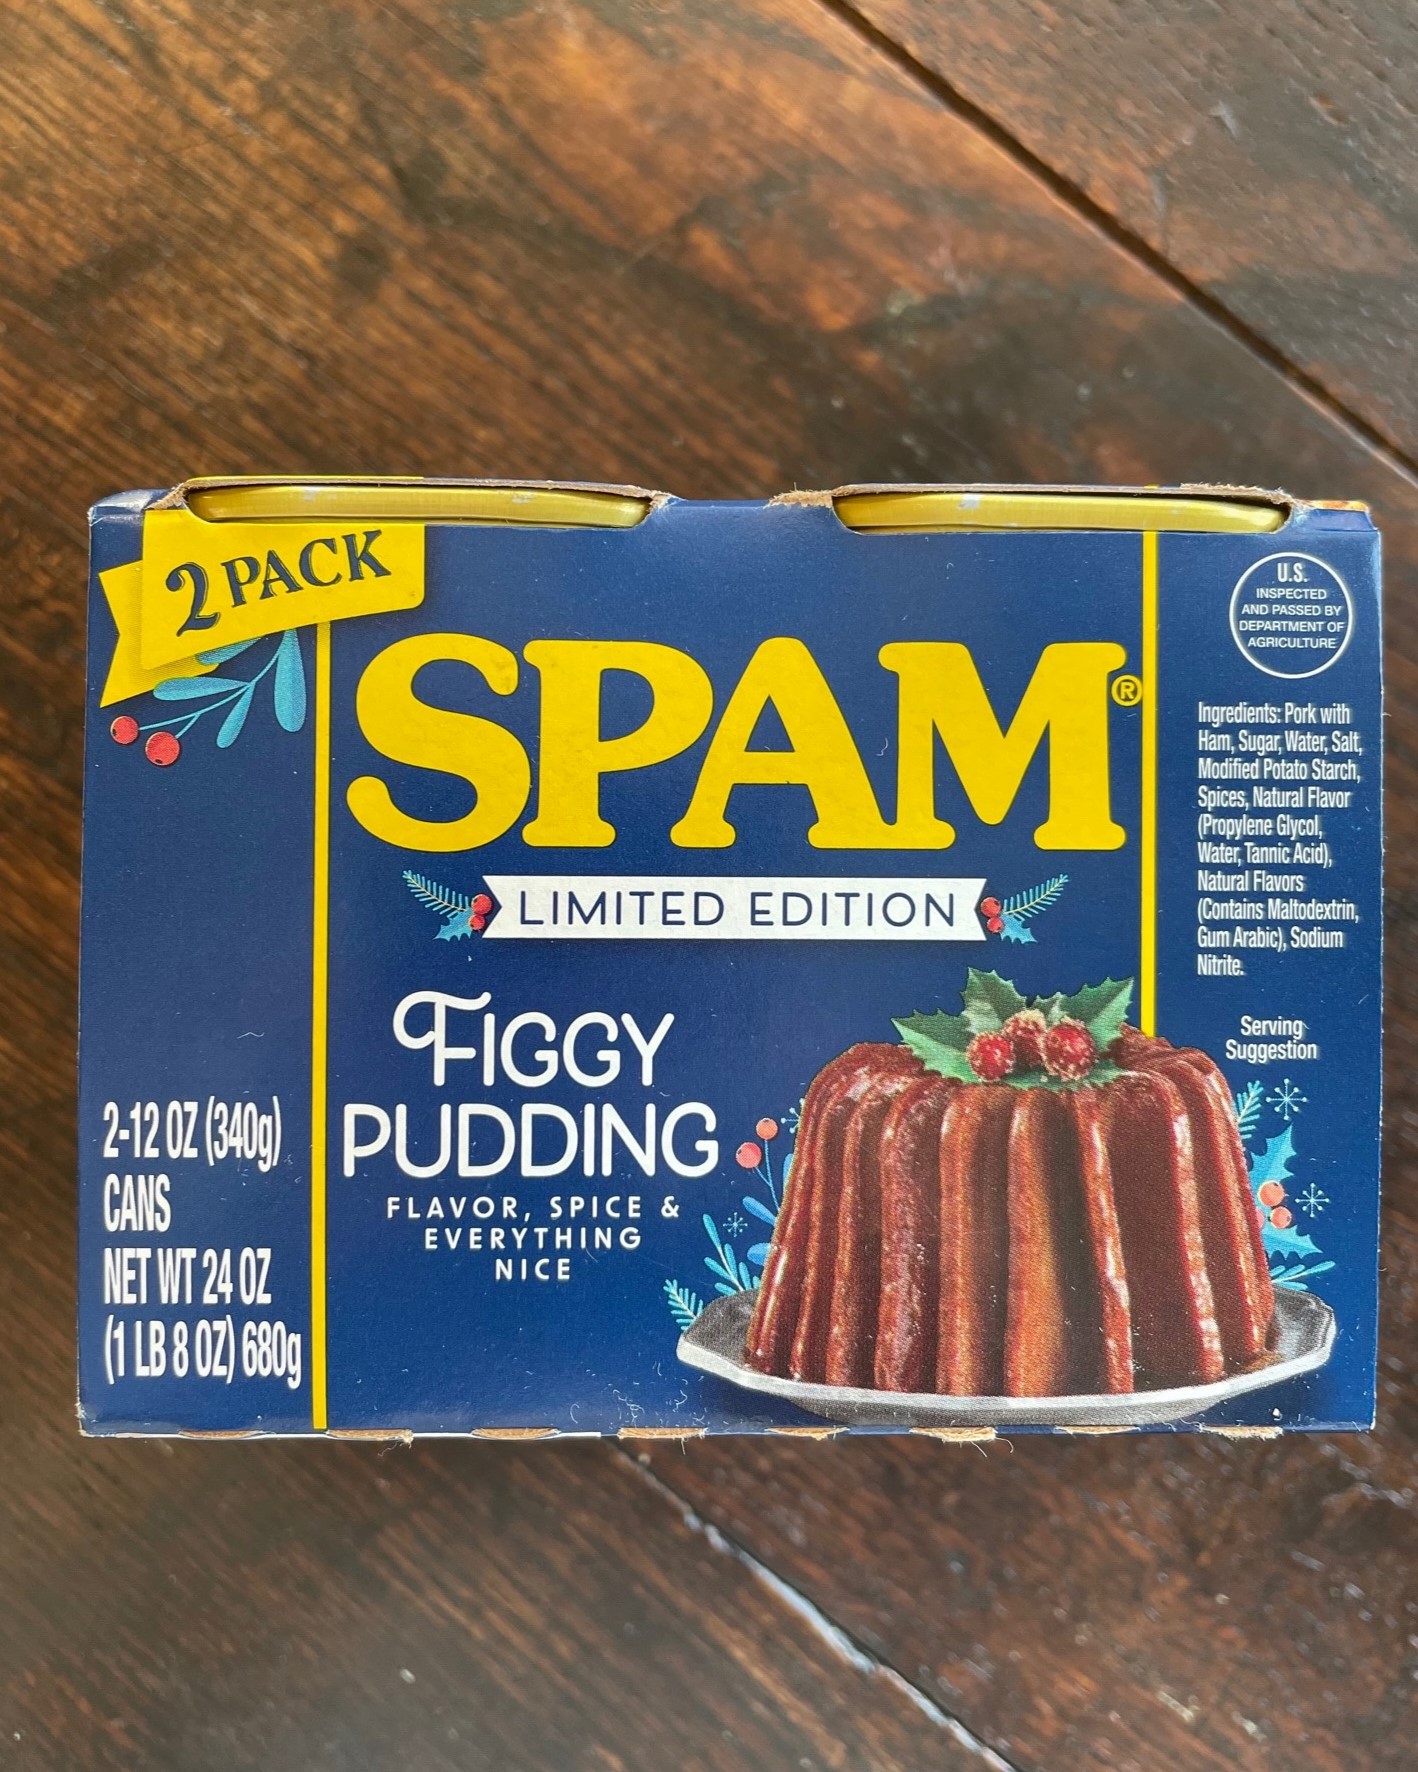 REVIEW: Limited Edition Spam Figgy Pudding - The Impulsive Buy